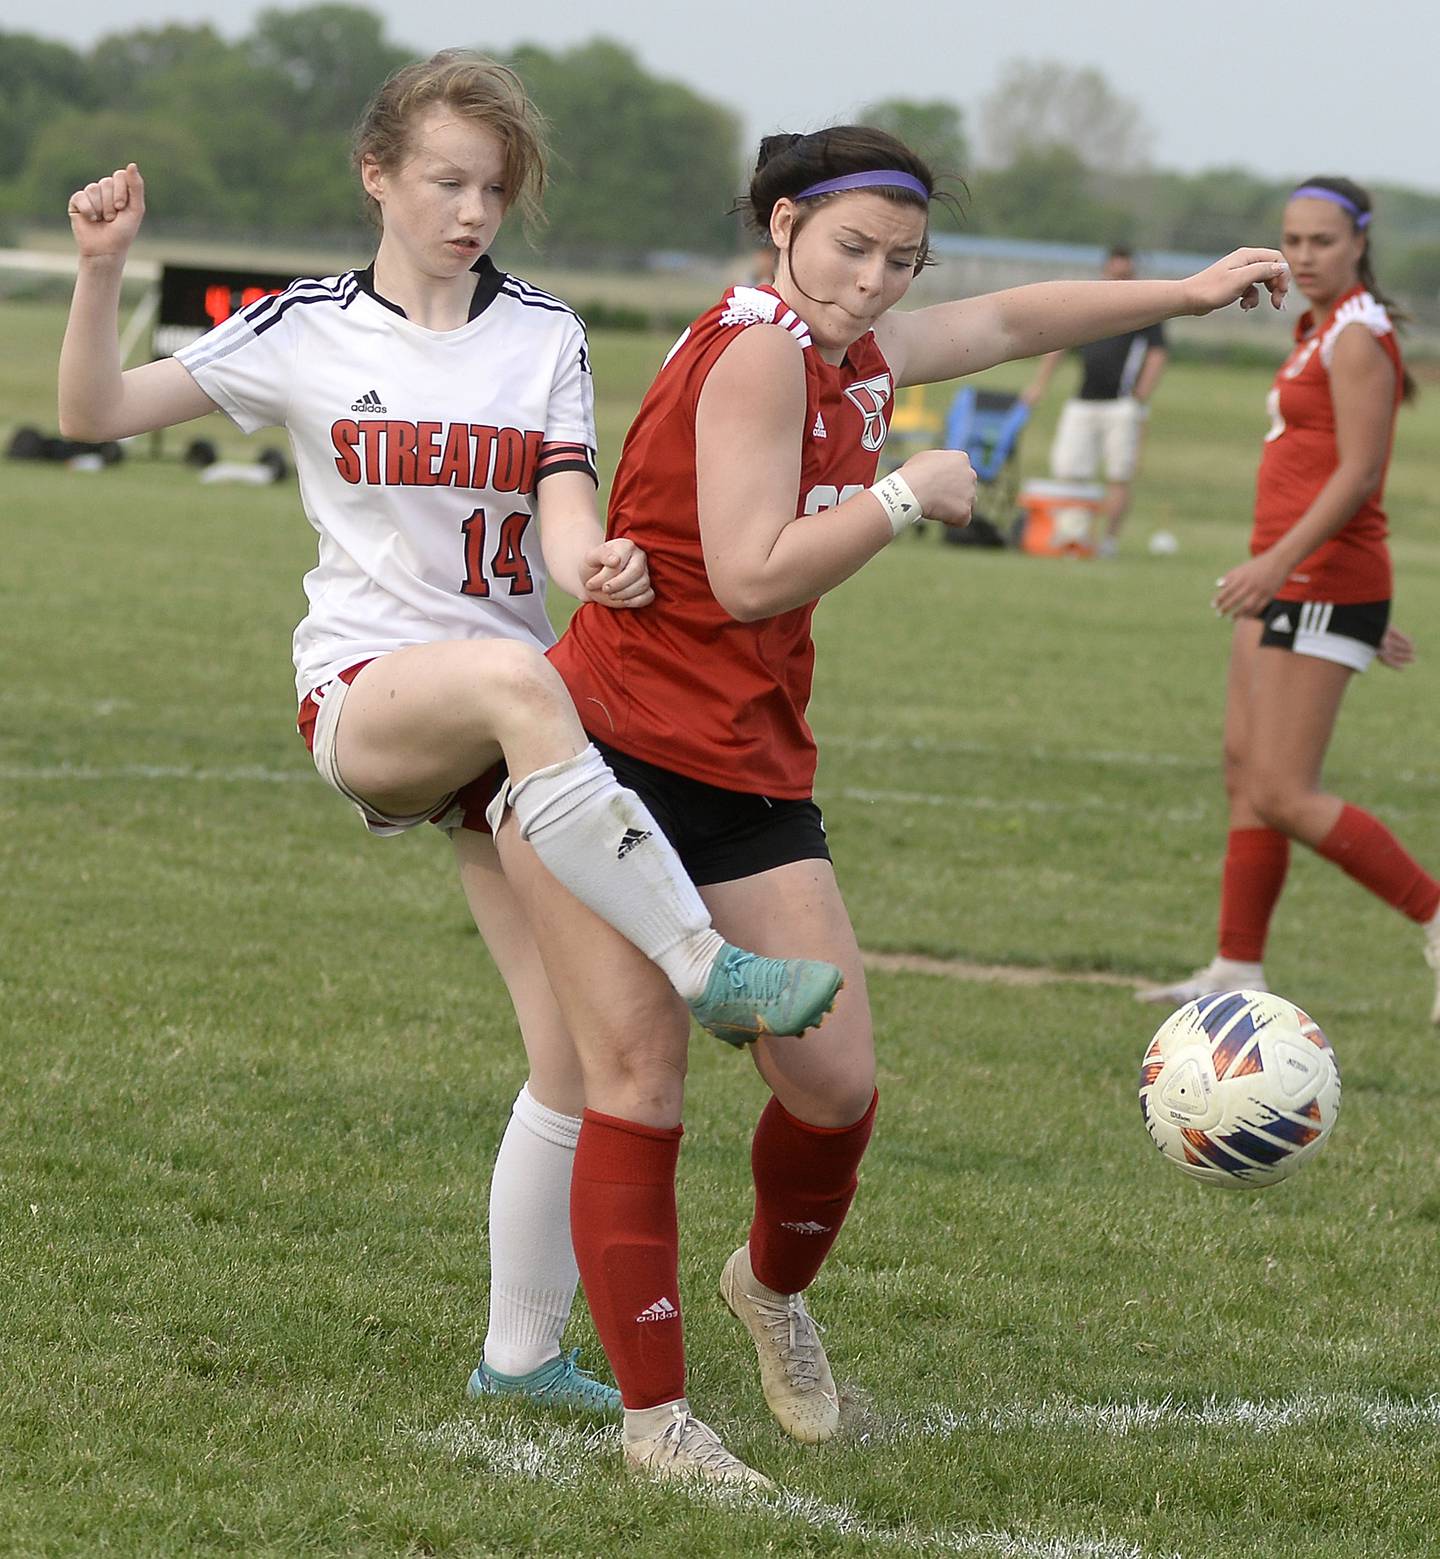 Bridget McGurk (14) kicks the ball through contact from Metamora's Maddie Morris Streator's Anna Russow (at left) works against Metamora's Lucy Mischler on Friday, May 19, 2023, during the championship match of the Class 2A Streator Regional at the Streator Family YMCA.